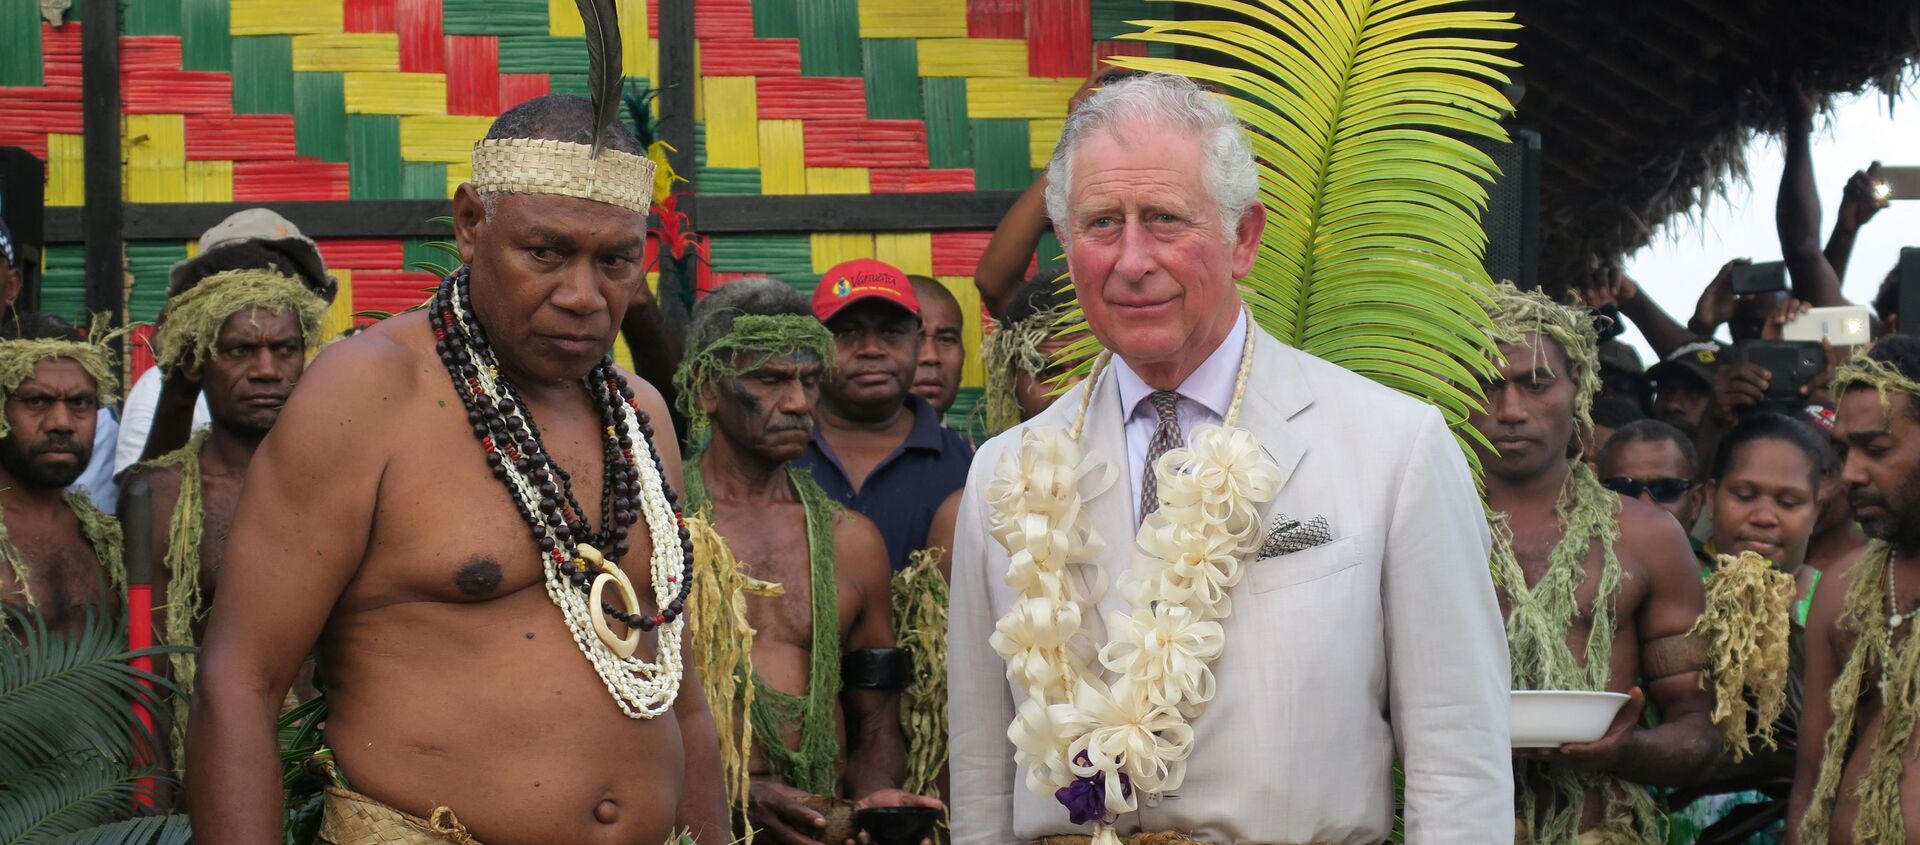 Britain's Prince Charles (R) stands with Chief Seni Mao Tirsupe, the President of the Malvatumauri Council of Chiefs, at the Chief’s Nakamal in Port Vila on April 7, 2018 - Sputnik International, 1920, 13.04.2021